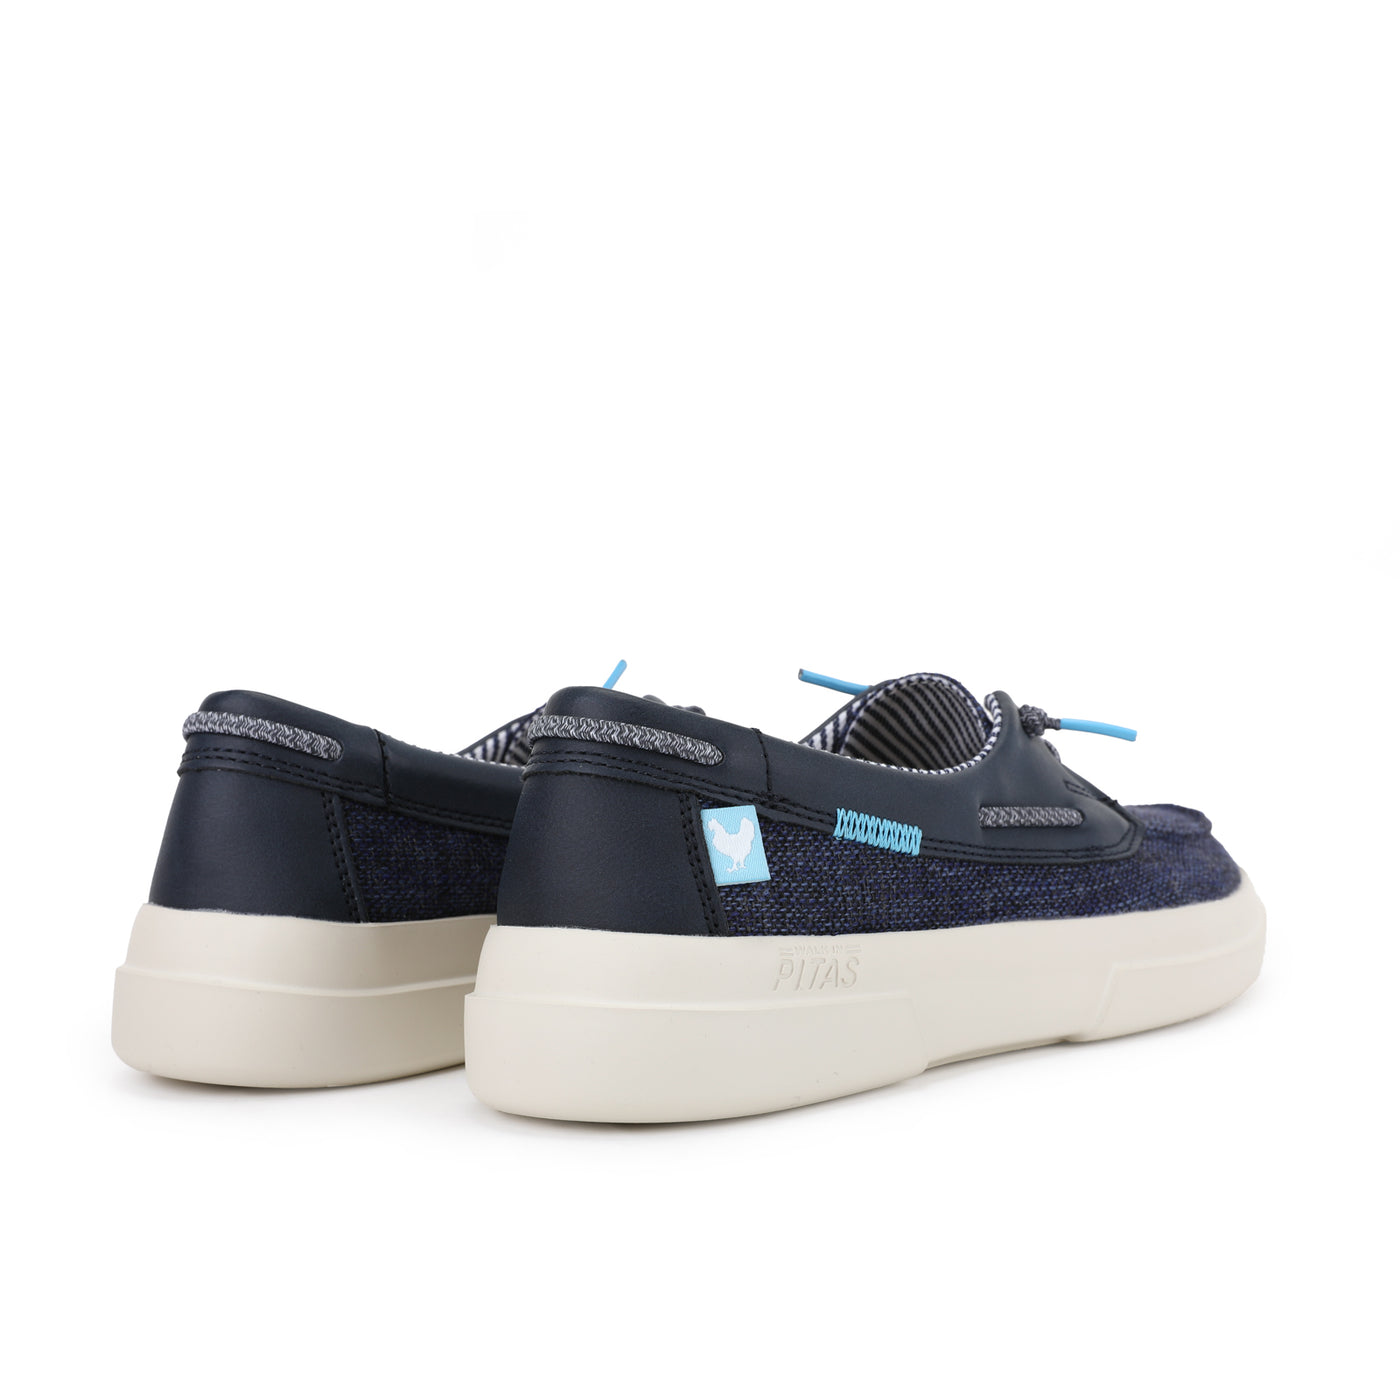 Navy Blue Pic Viola Easy-On Deck Shoes